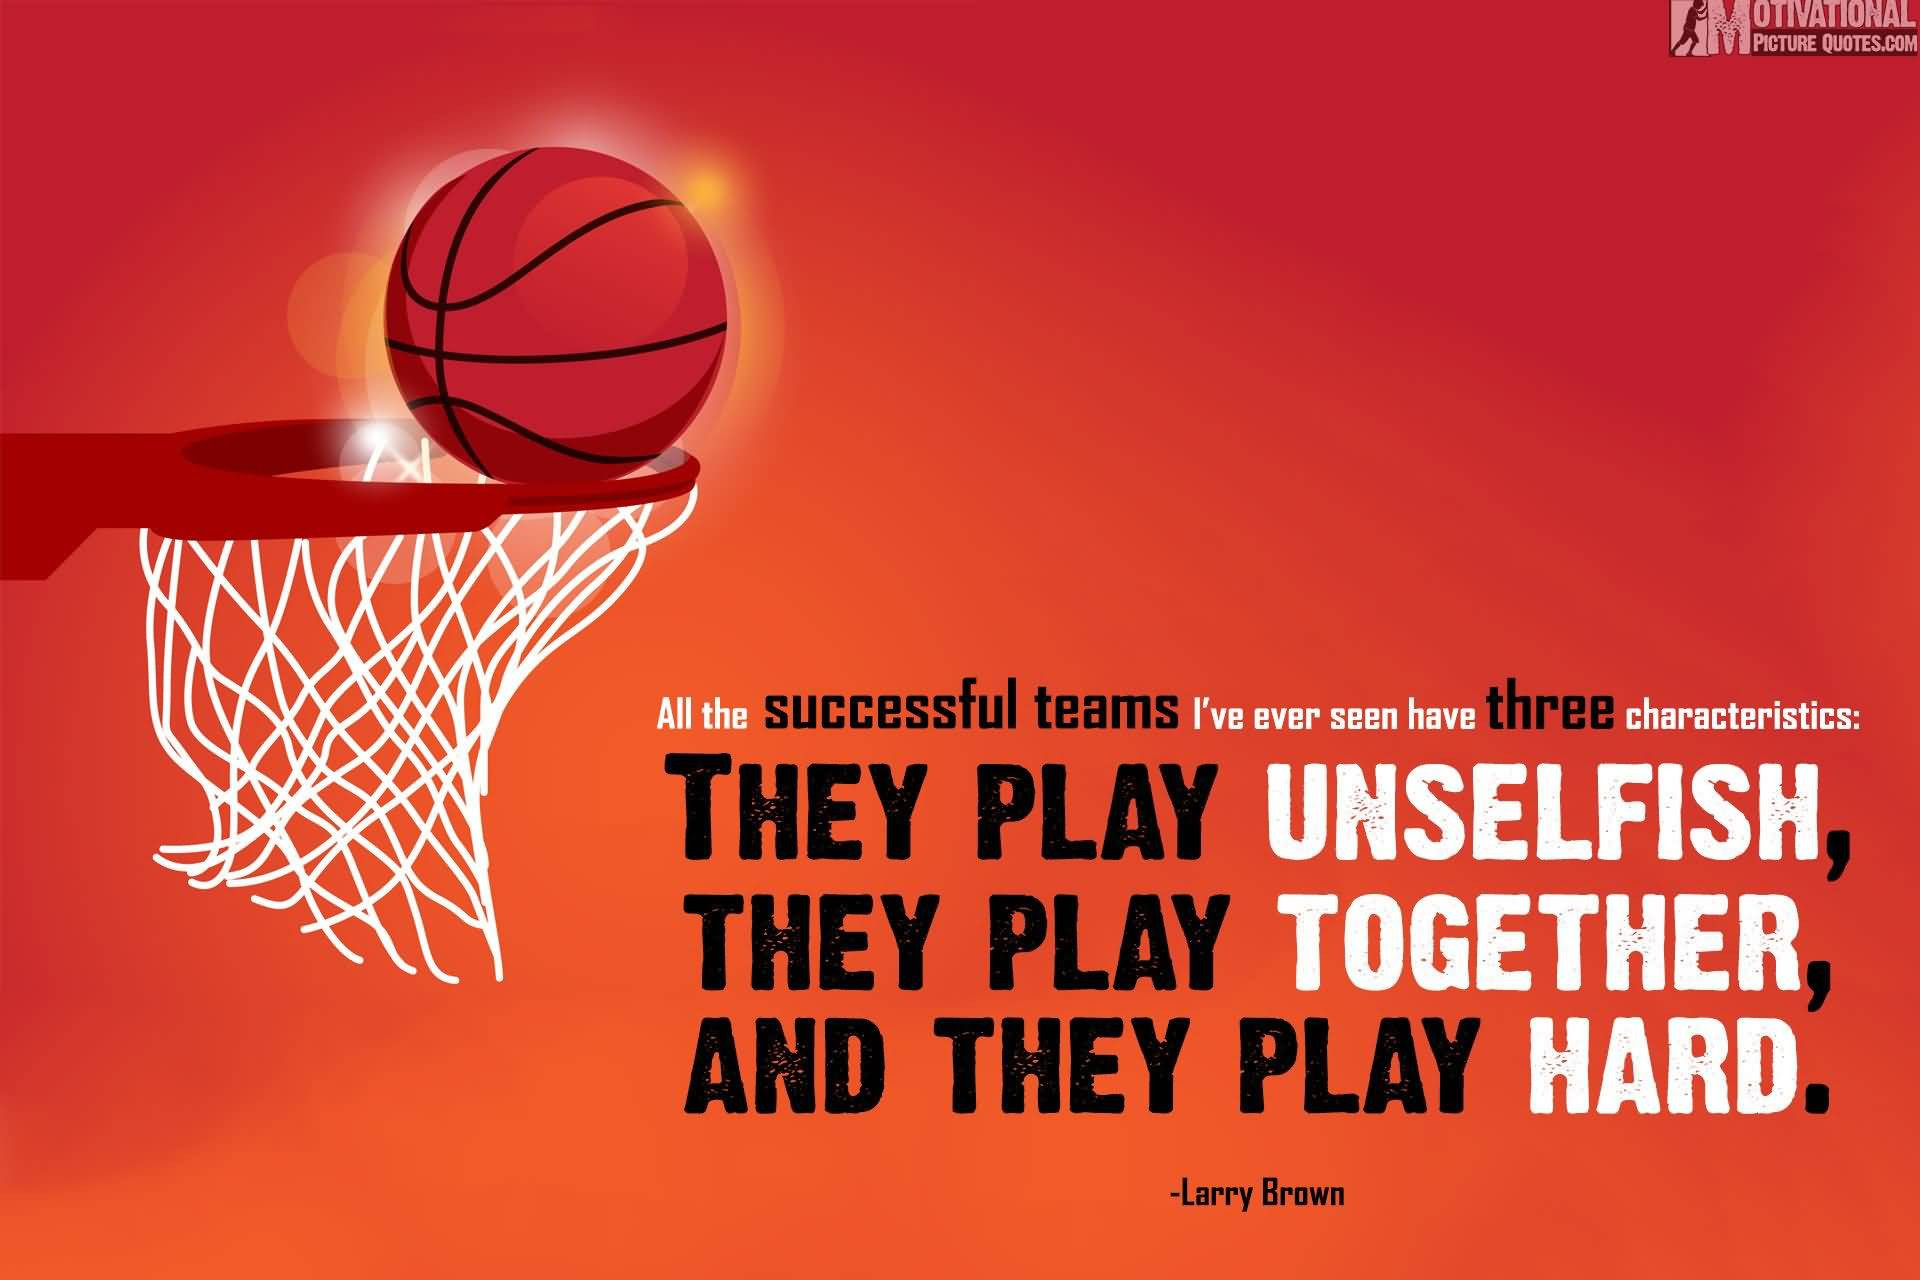 Basketball Motivational Quotes
 23 Amazing Basketball Quotes For Players Motivation